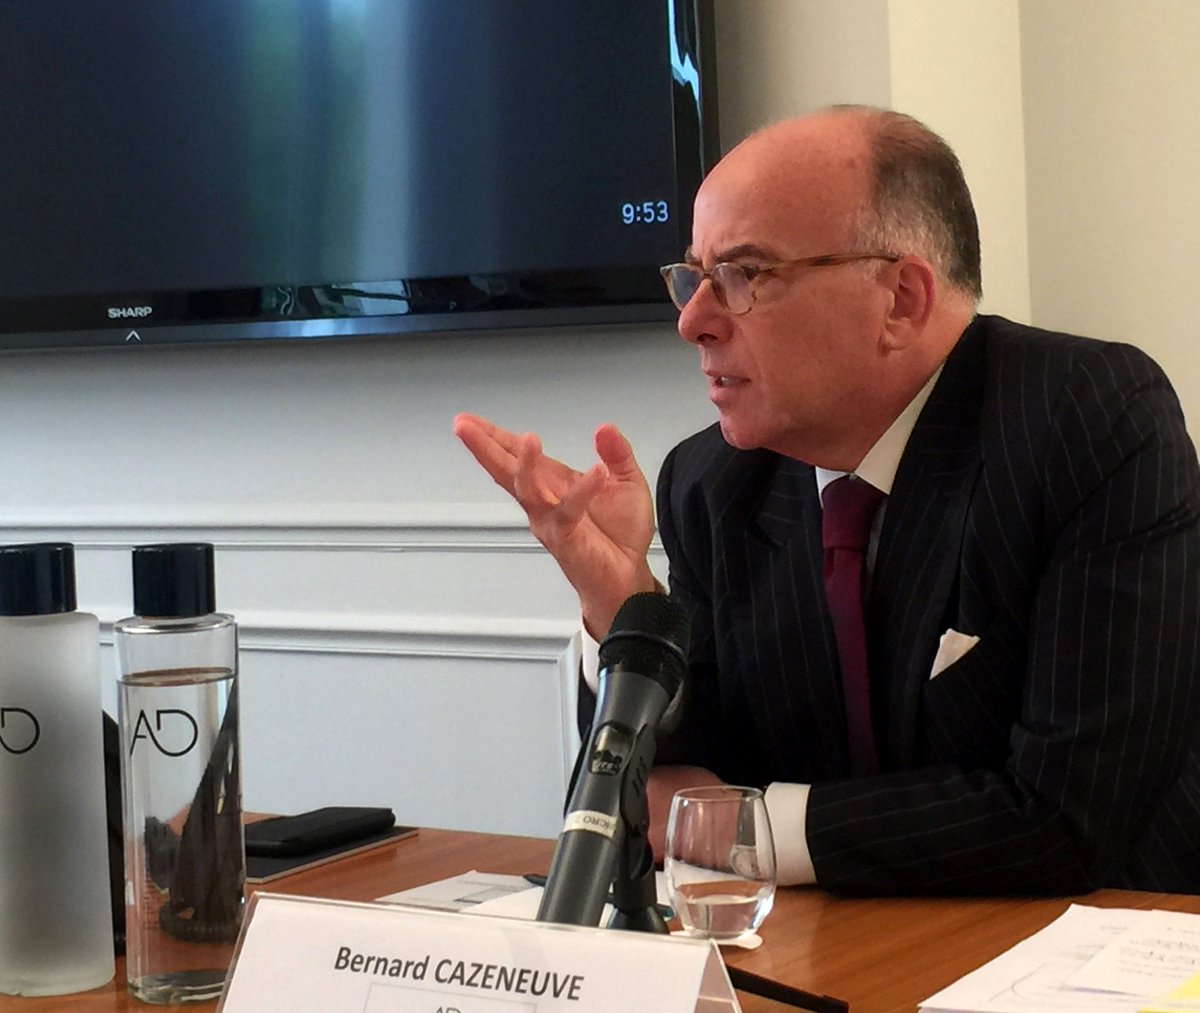 Thanks on behalf of EACC Paris to Monsieur Bernard Cazeneuve, Partner at August Debouzy and former Prime Minister. Insightful intervention on the law Sapin II and other European compliance initiatives  linkedin.com/feed/update/ur…  #bernardcazeneuve #augustdebouzy
#compliance